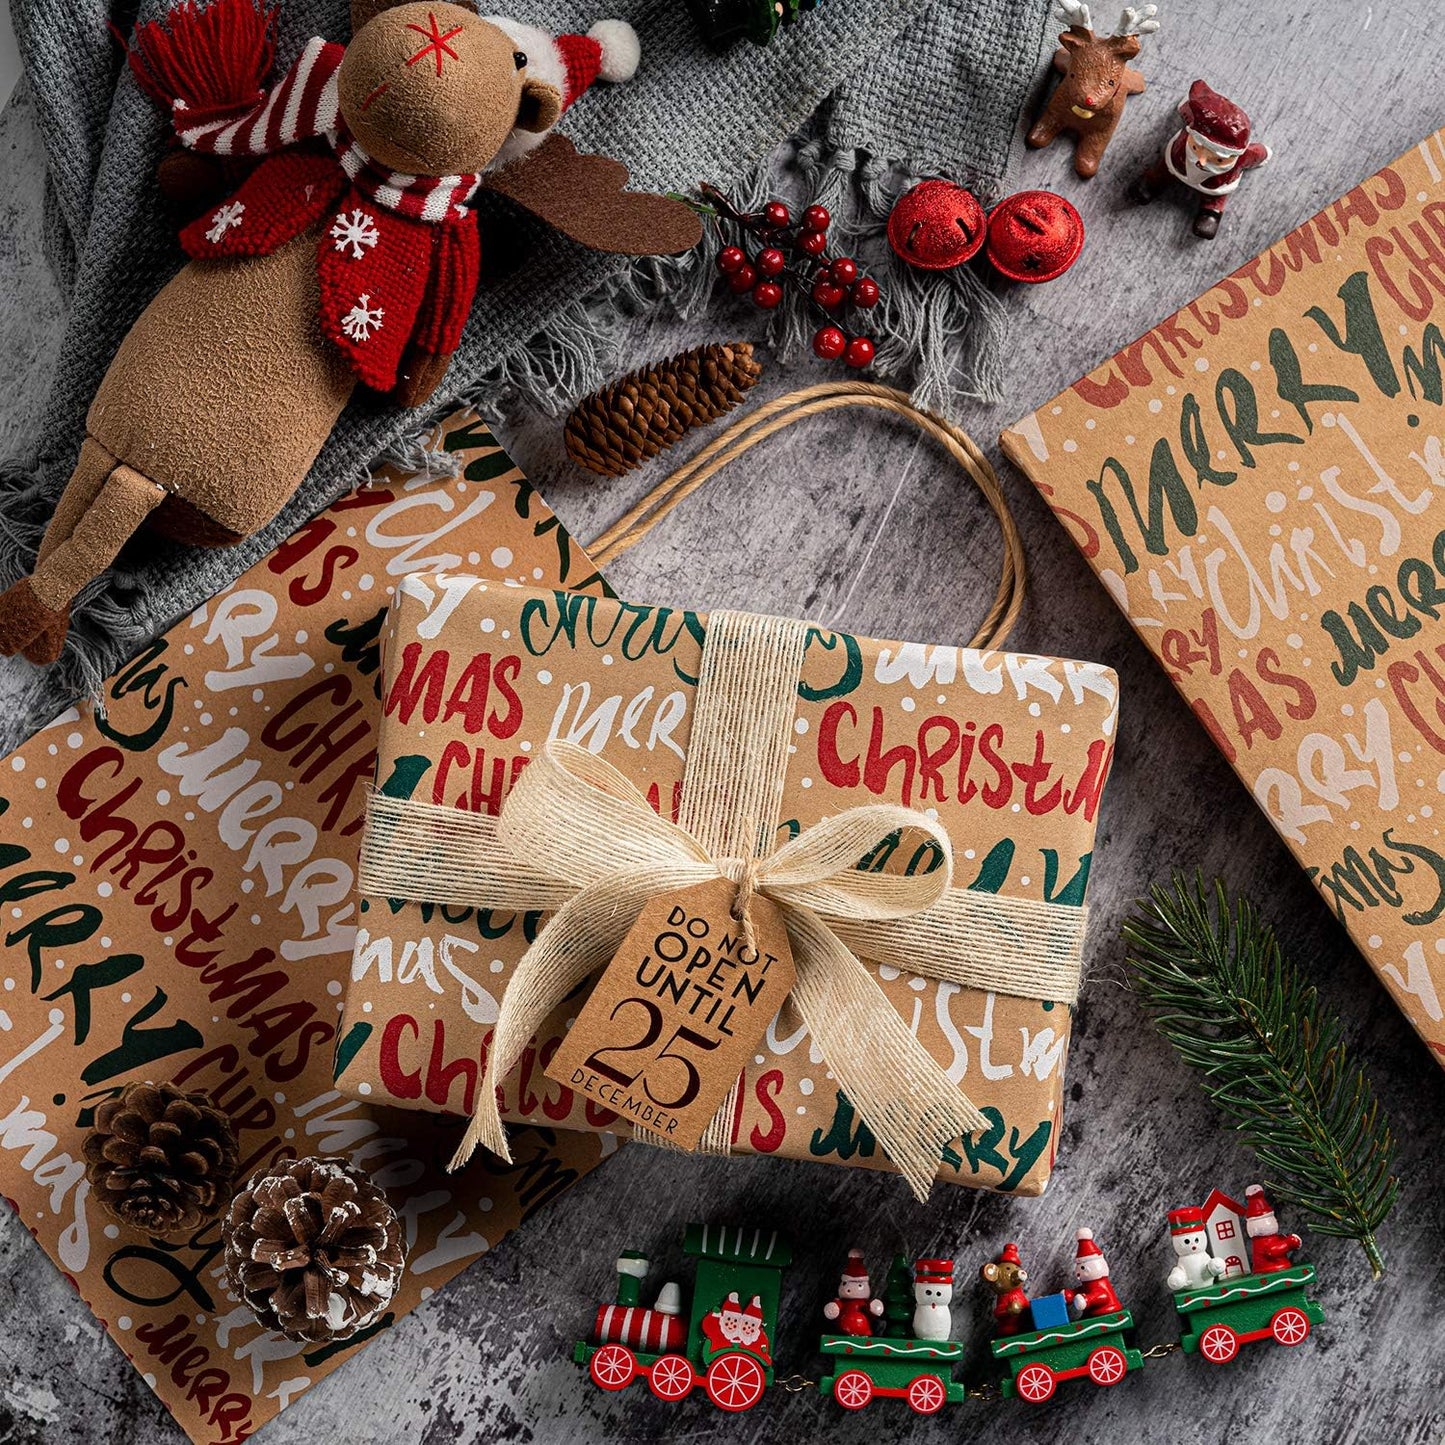 Christmas Wrapping Paper, Kraft Paper - Snowflakes, Car and Christmas Tree, Stripes and Merry Christmas - 4 Rolls - 30 Inches X 10 Feet per Roll